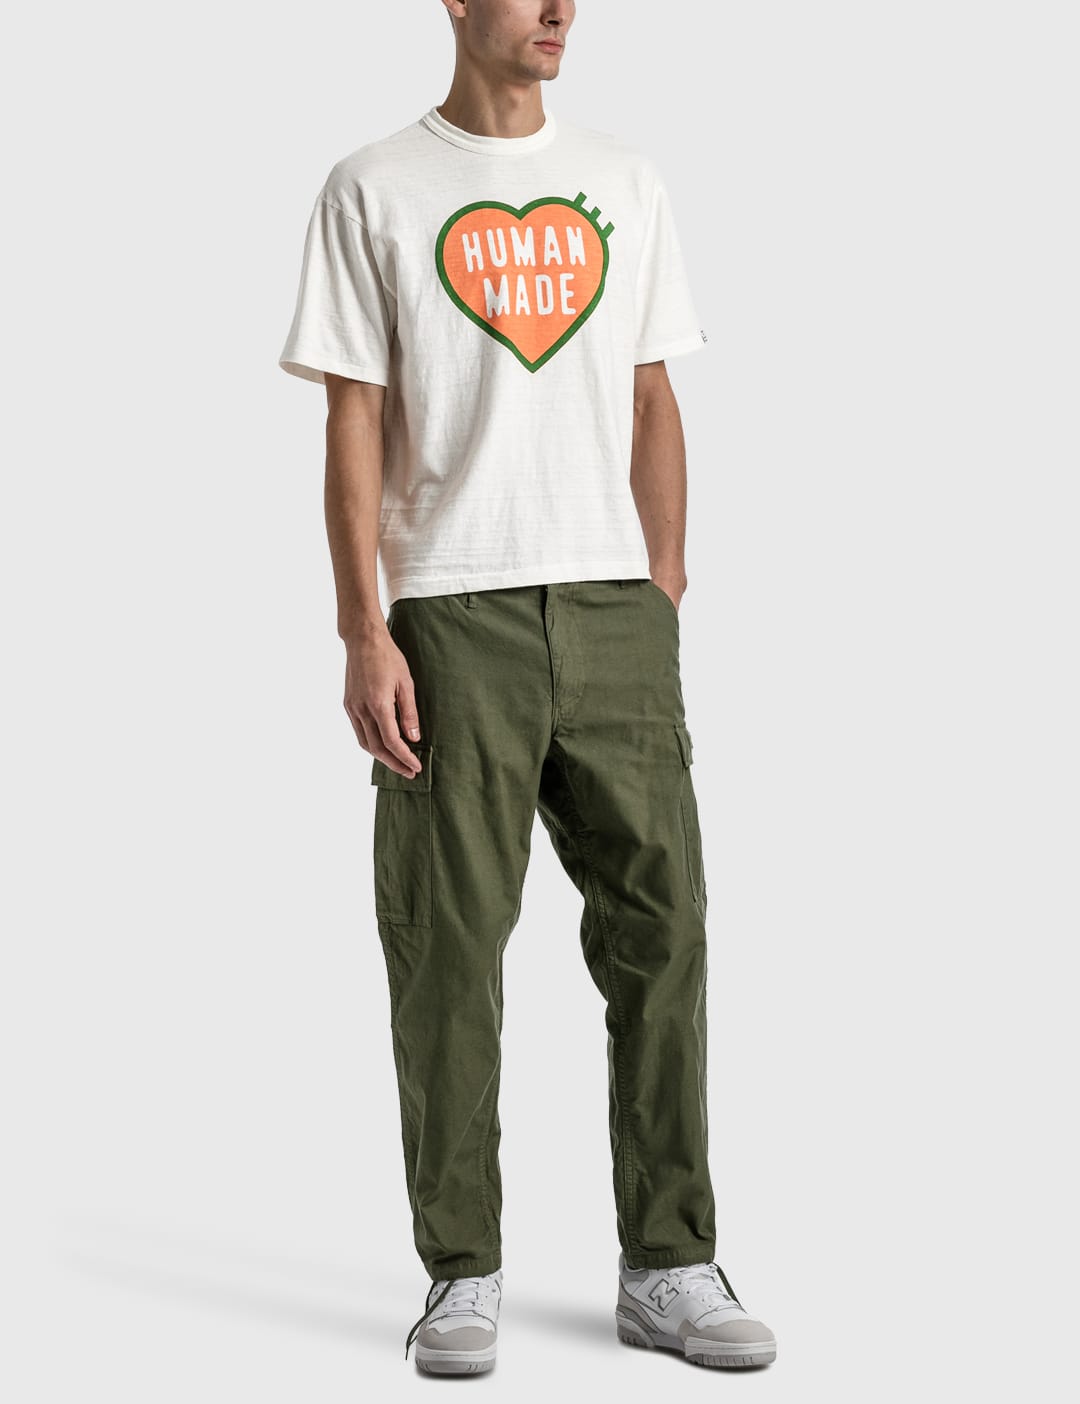 Human Made - Cargo Pants with Carabiner | HBX - Globally Curated